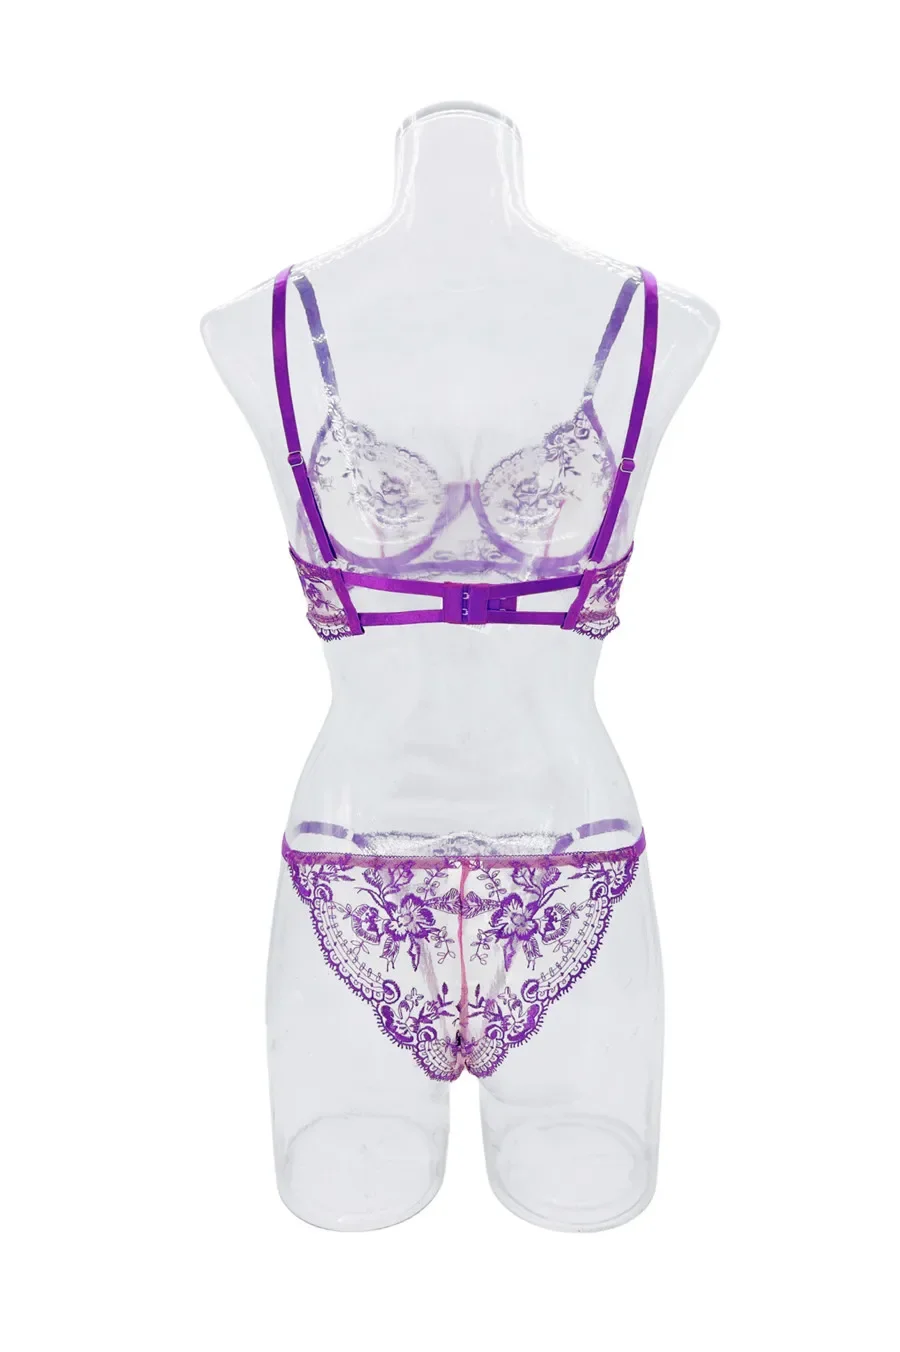  Women's Bra, Bra and Panties, Top and Bottom Set, Embroidery,  Flashy, Floral Pattern, Gorgeous Women's Underwear, purple : Clothing,  Shoes & Jewelry